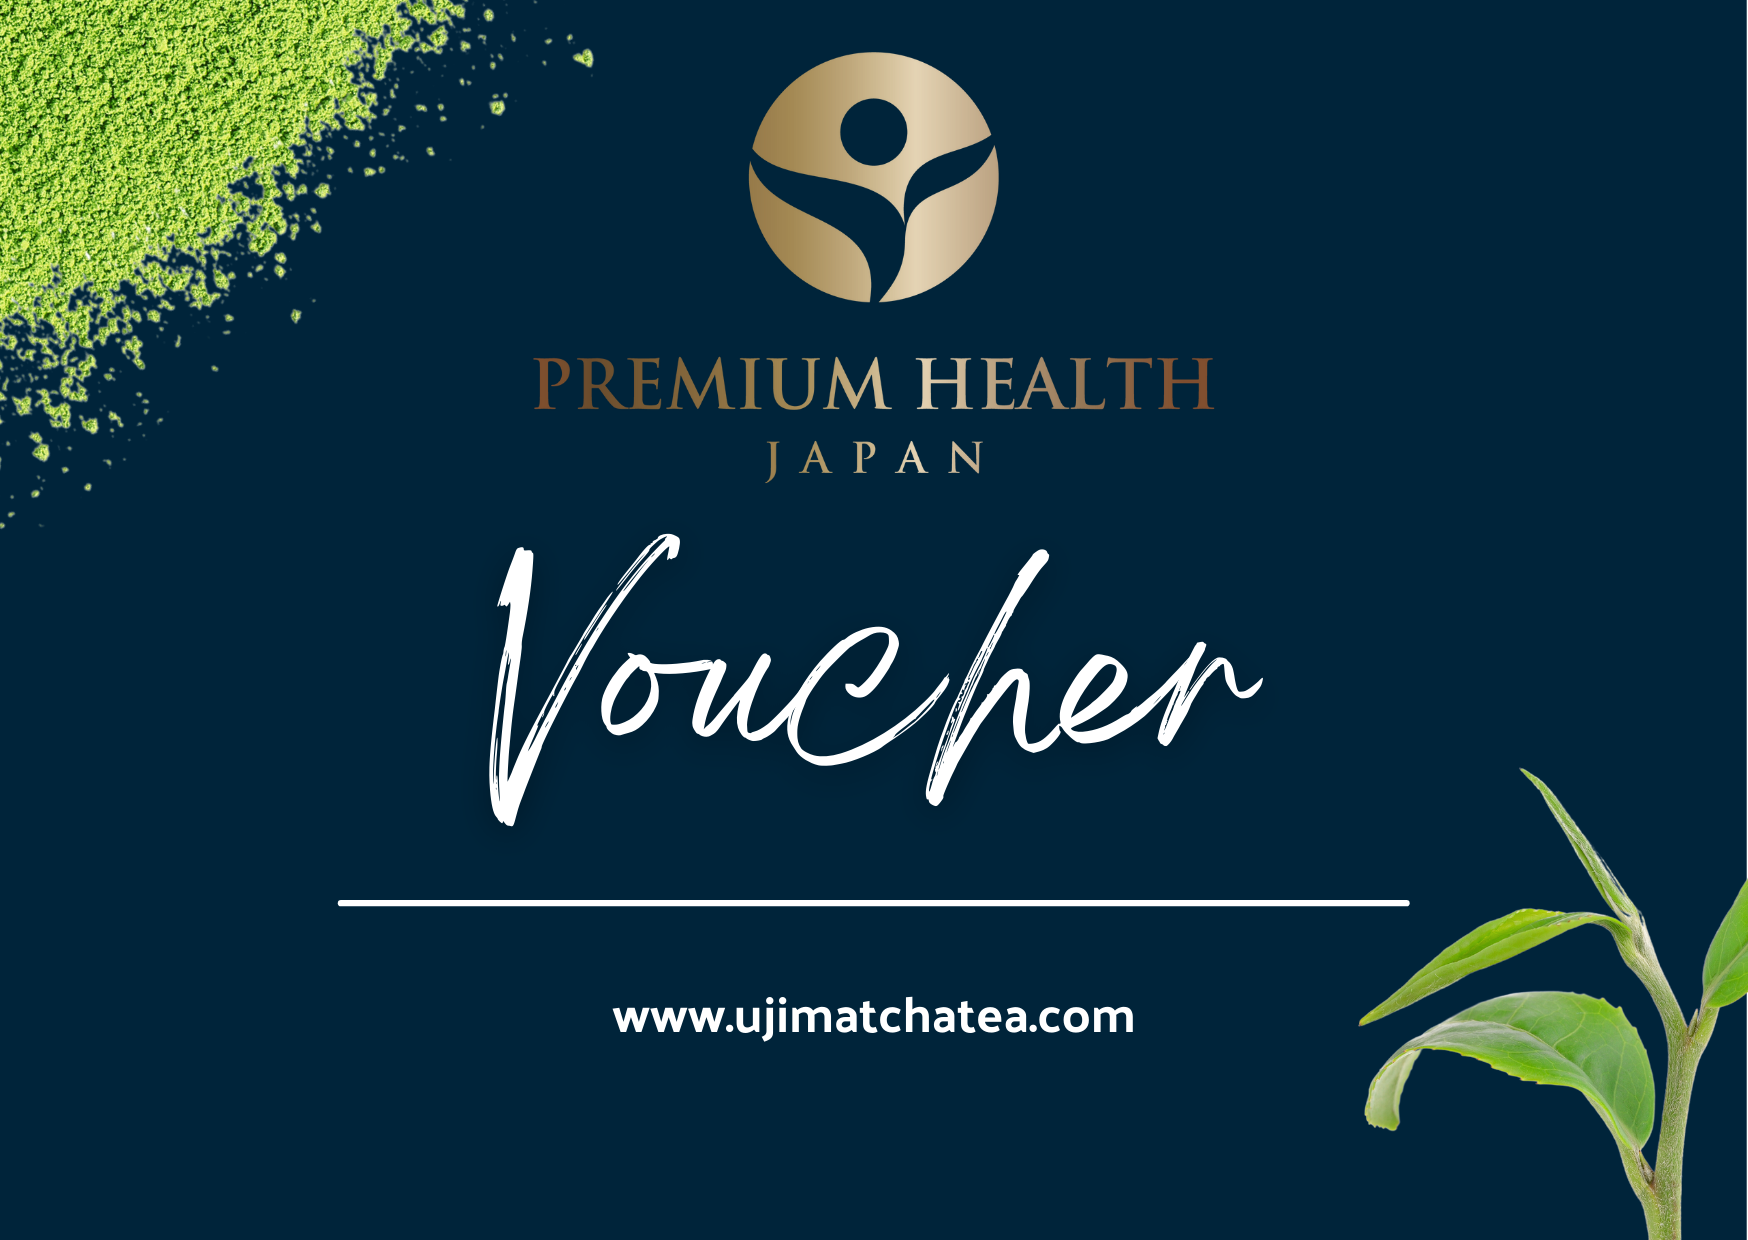 Premium Health Japan branded gift card with matcha powder and a green tea leaf